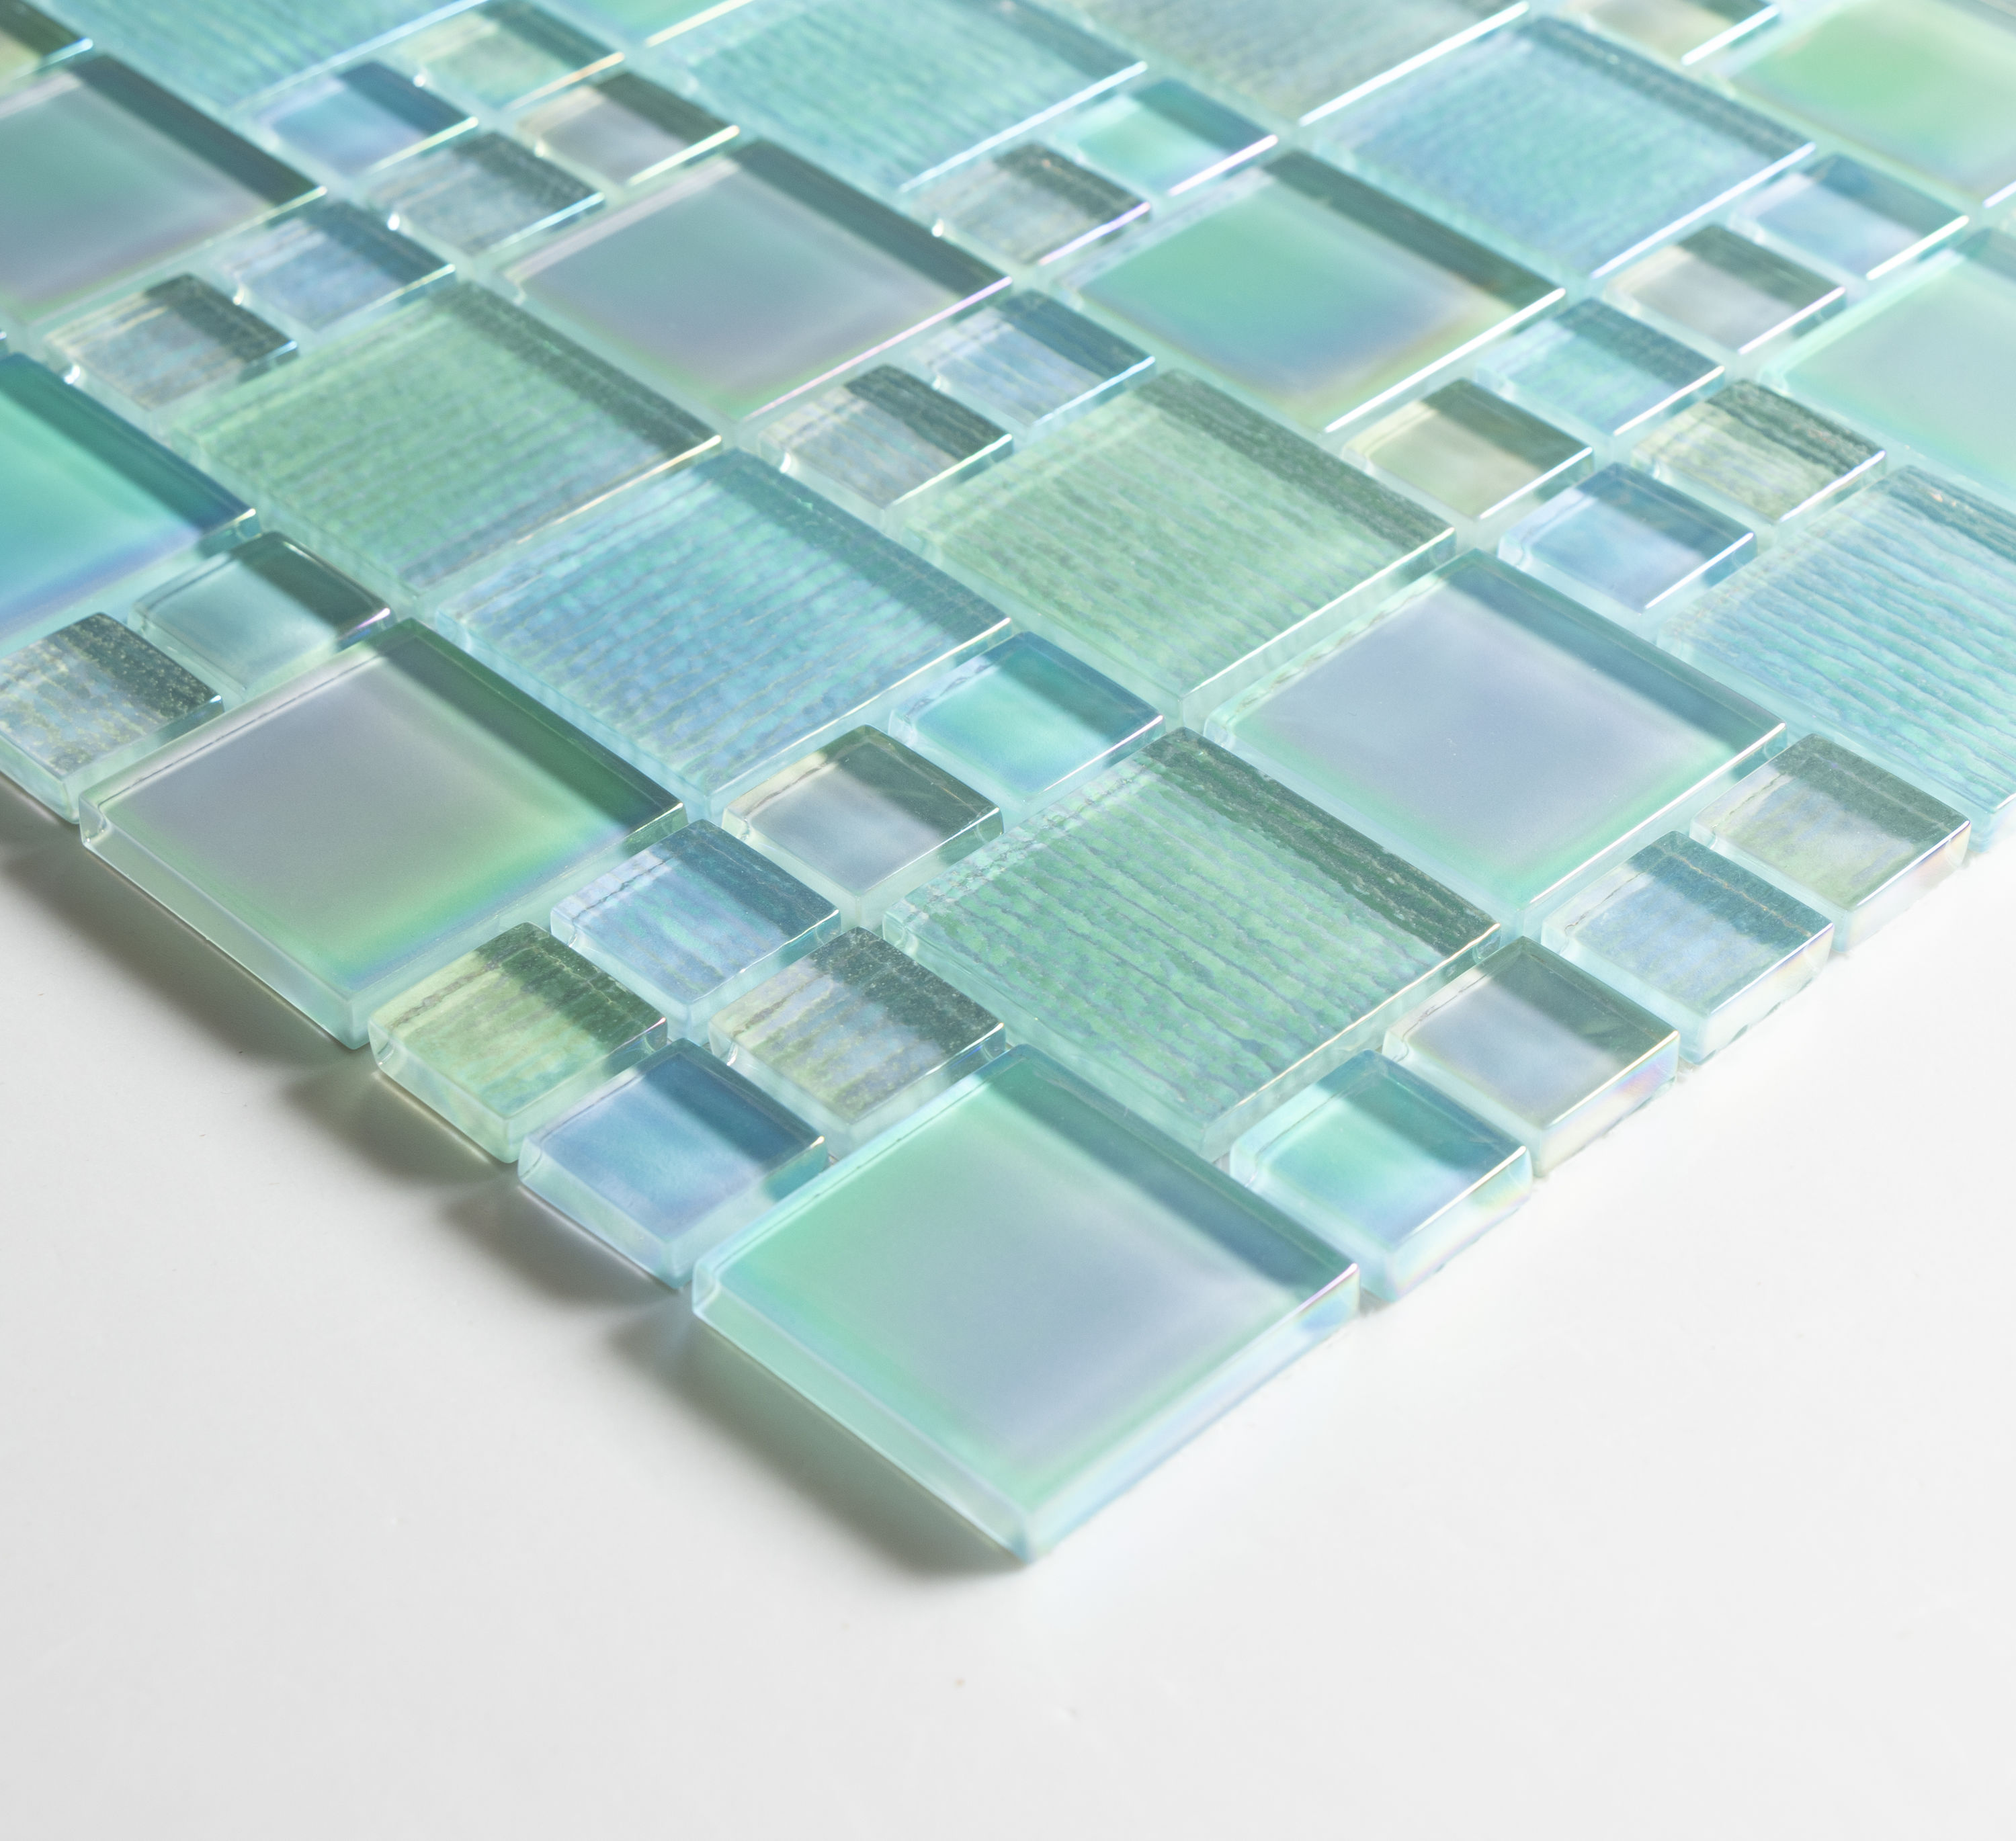 Glass Iridescent Electric Blue Subway Wall and Floor Tile - 2 x 12 in. -  The Tile Shop